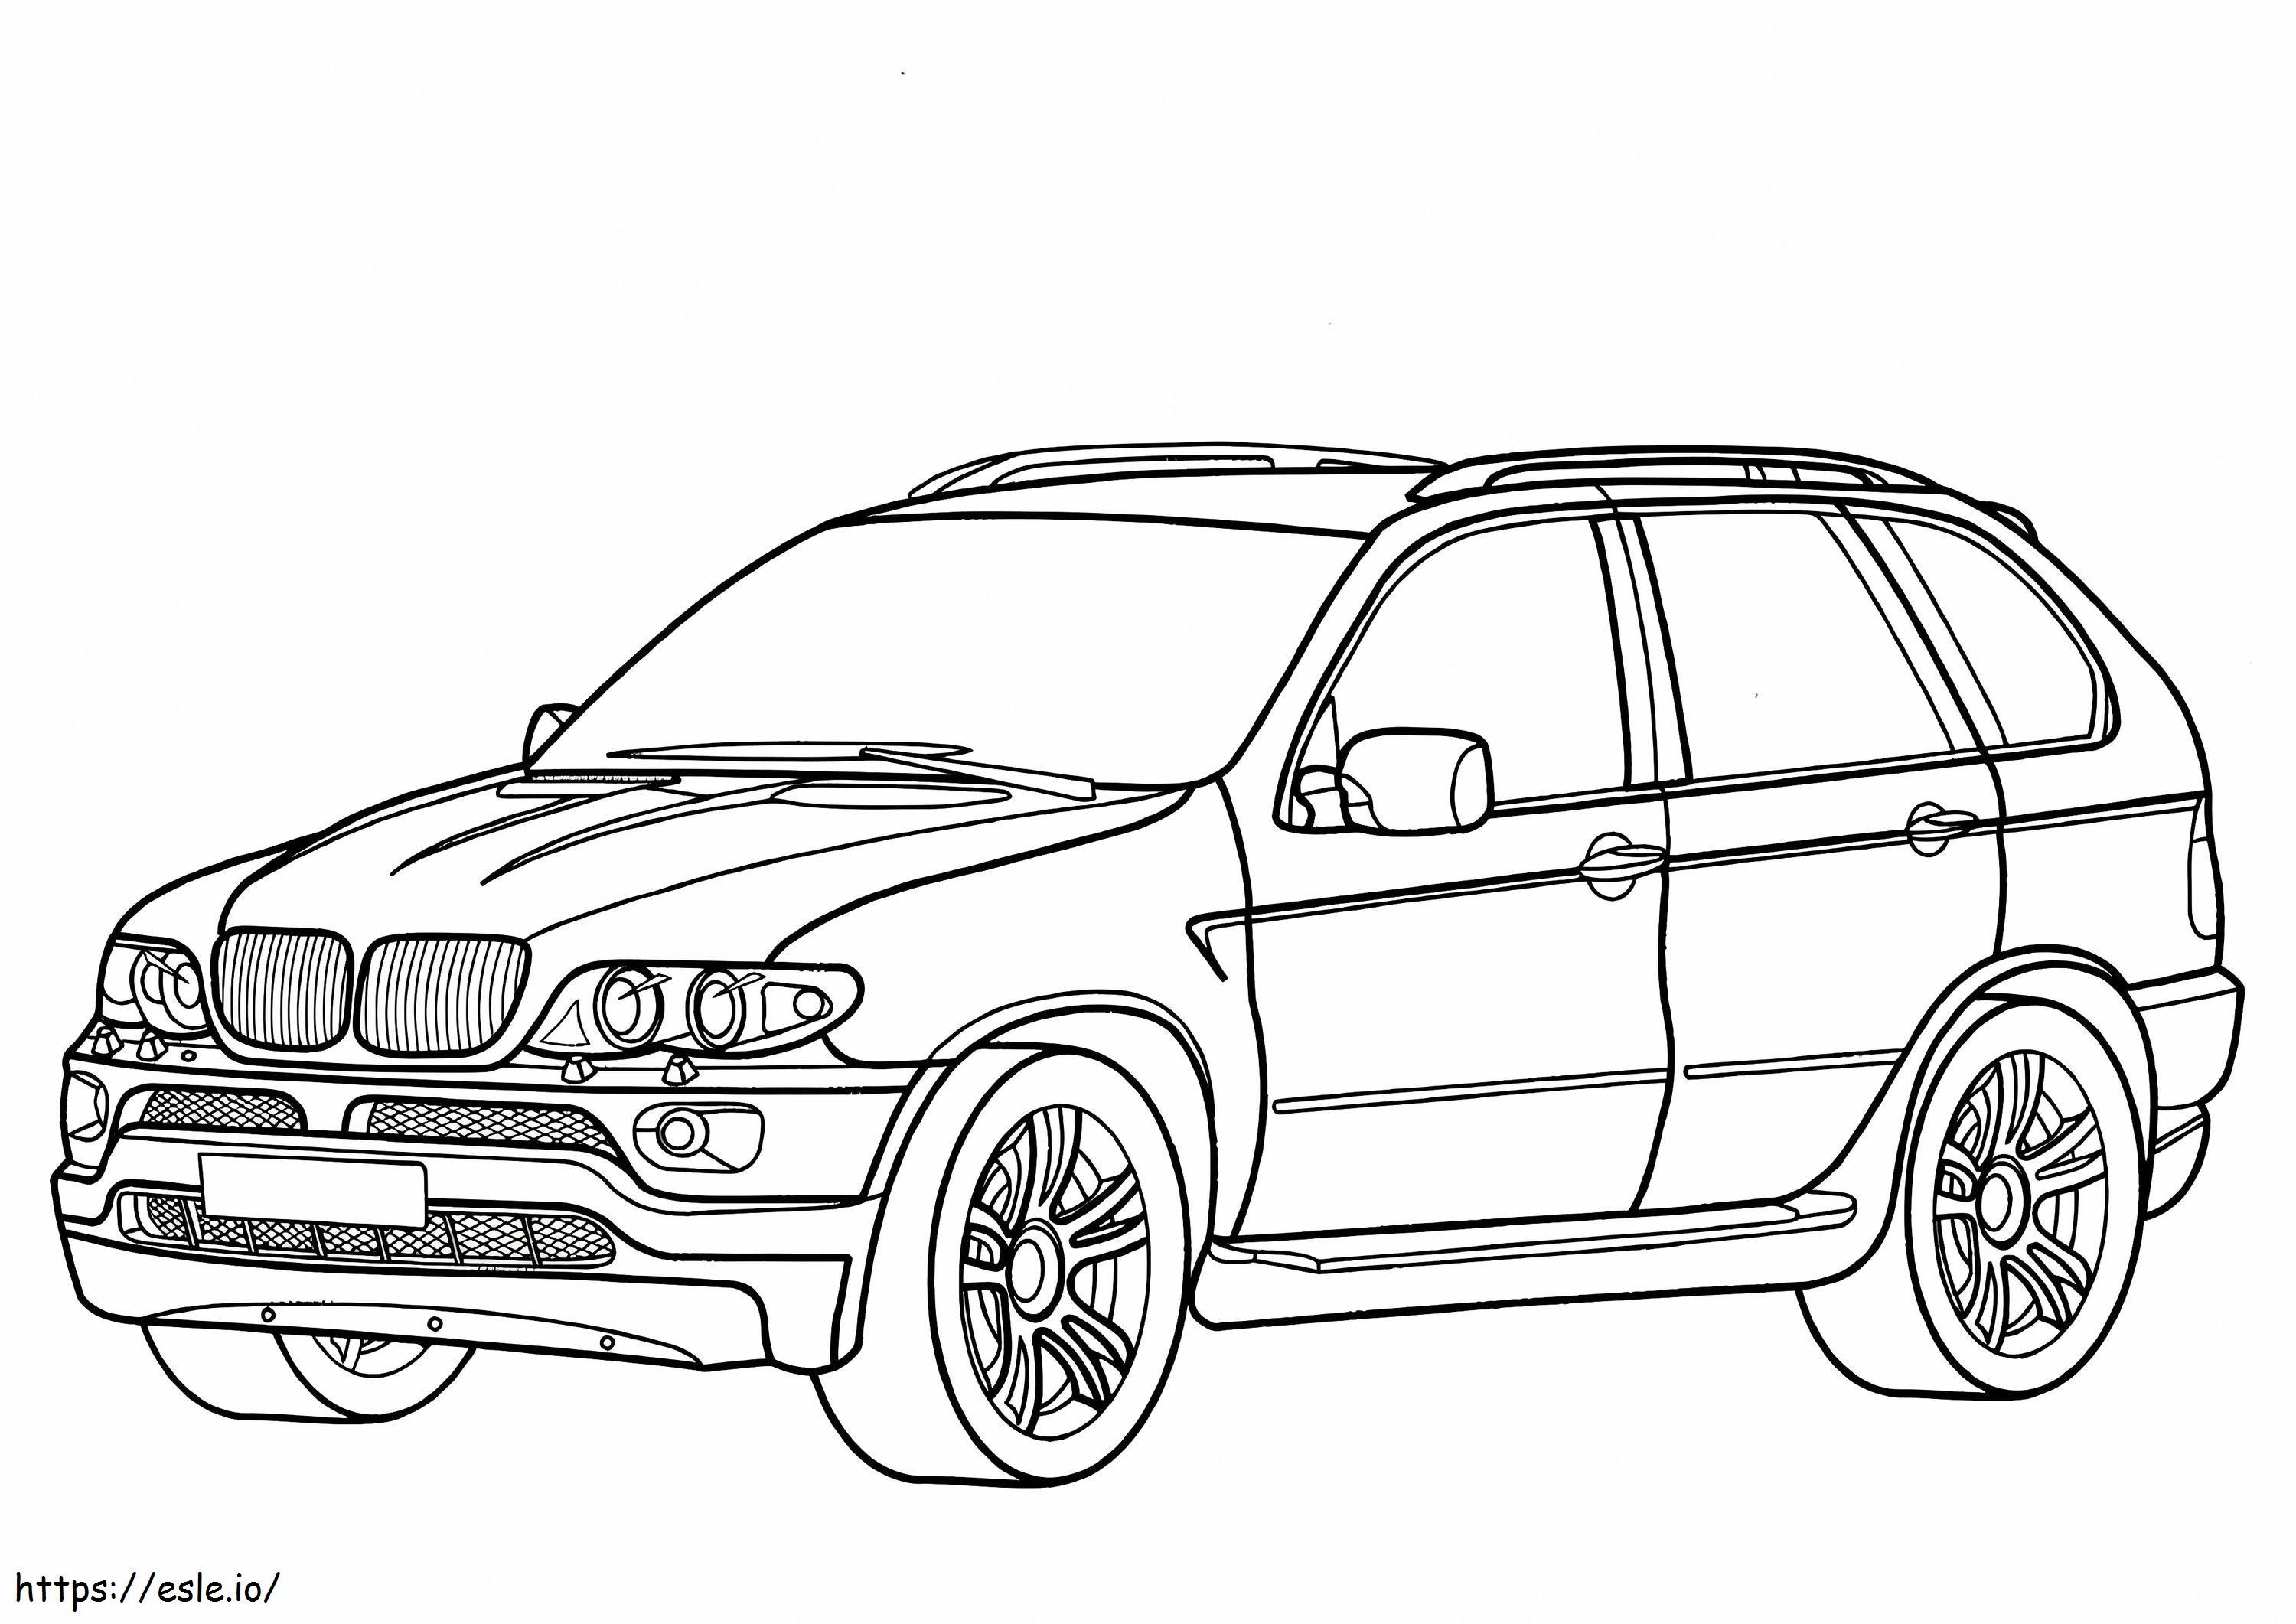 Bmw X5 coloring page